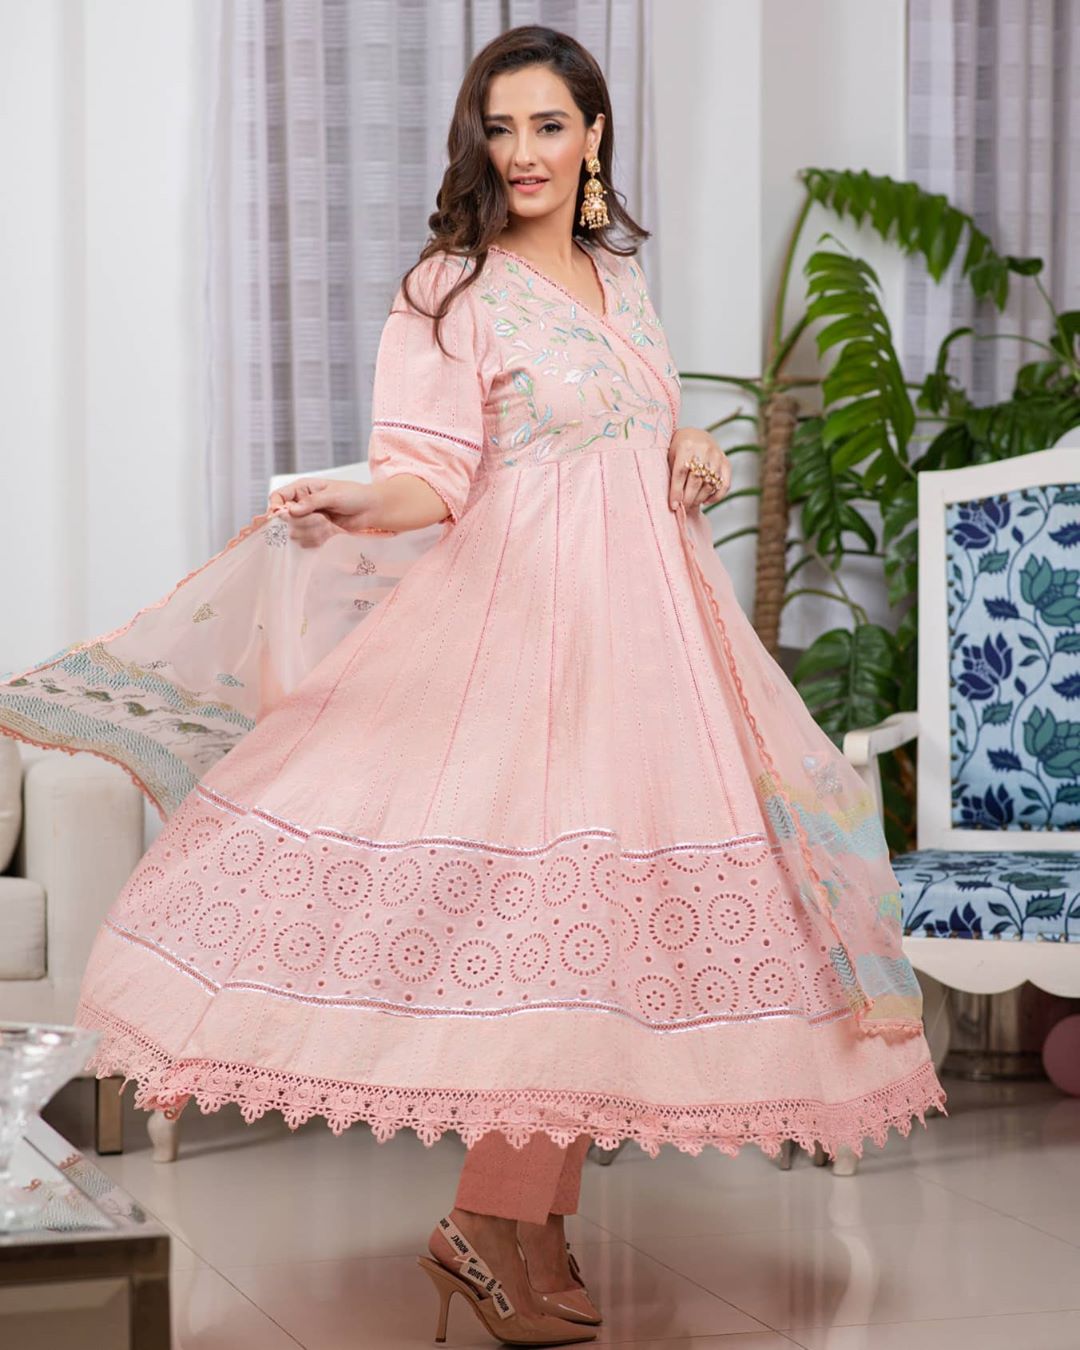 Actress Momal Sheikh Latest Beautiful Photoshoot – 24/7 News - What is ...